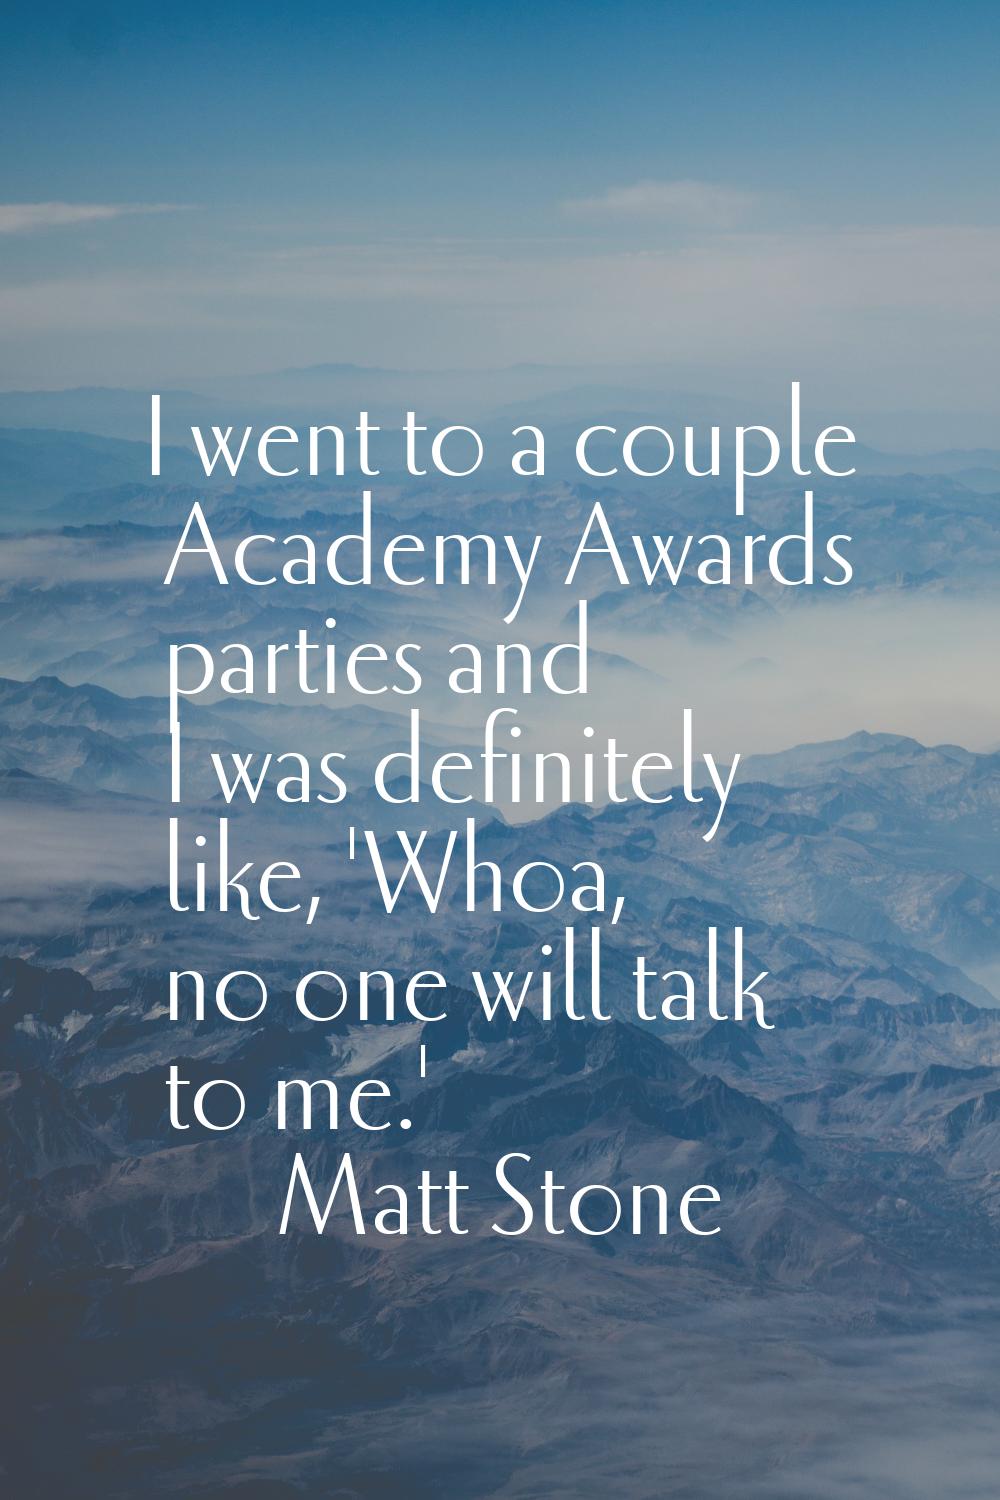 I went to a couple Academy Awards parties and I was definitely like, 'Whoa, no one will talk to me.